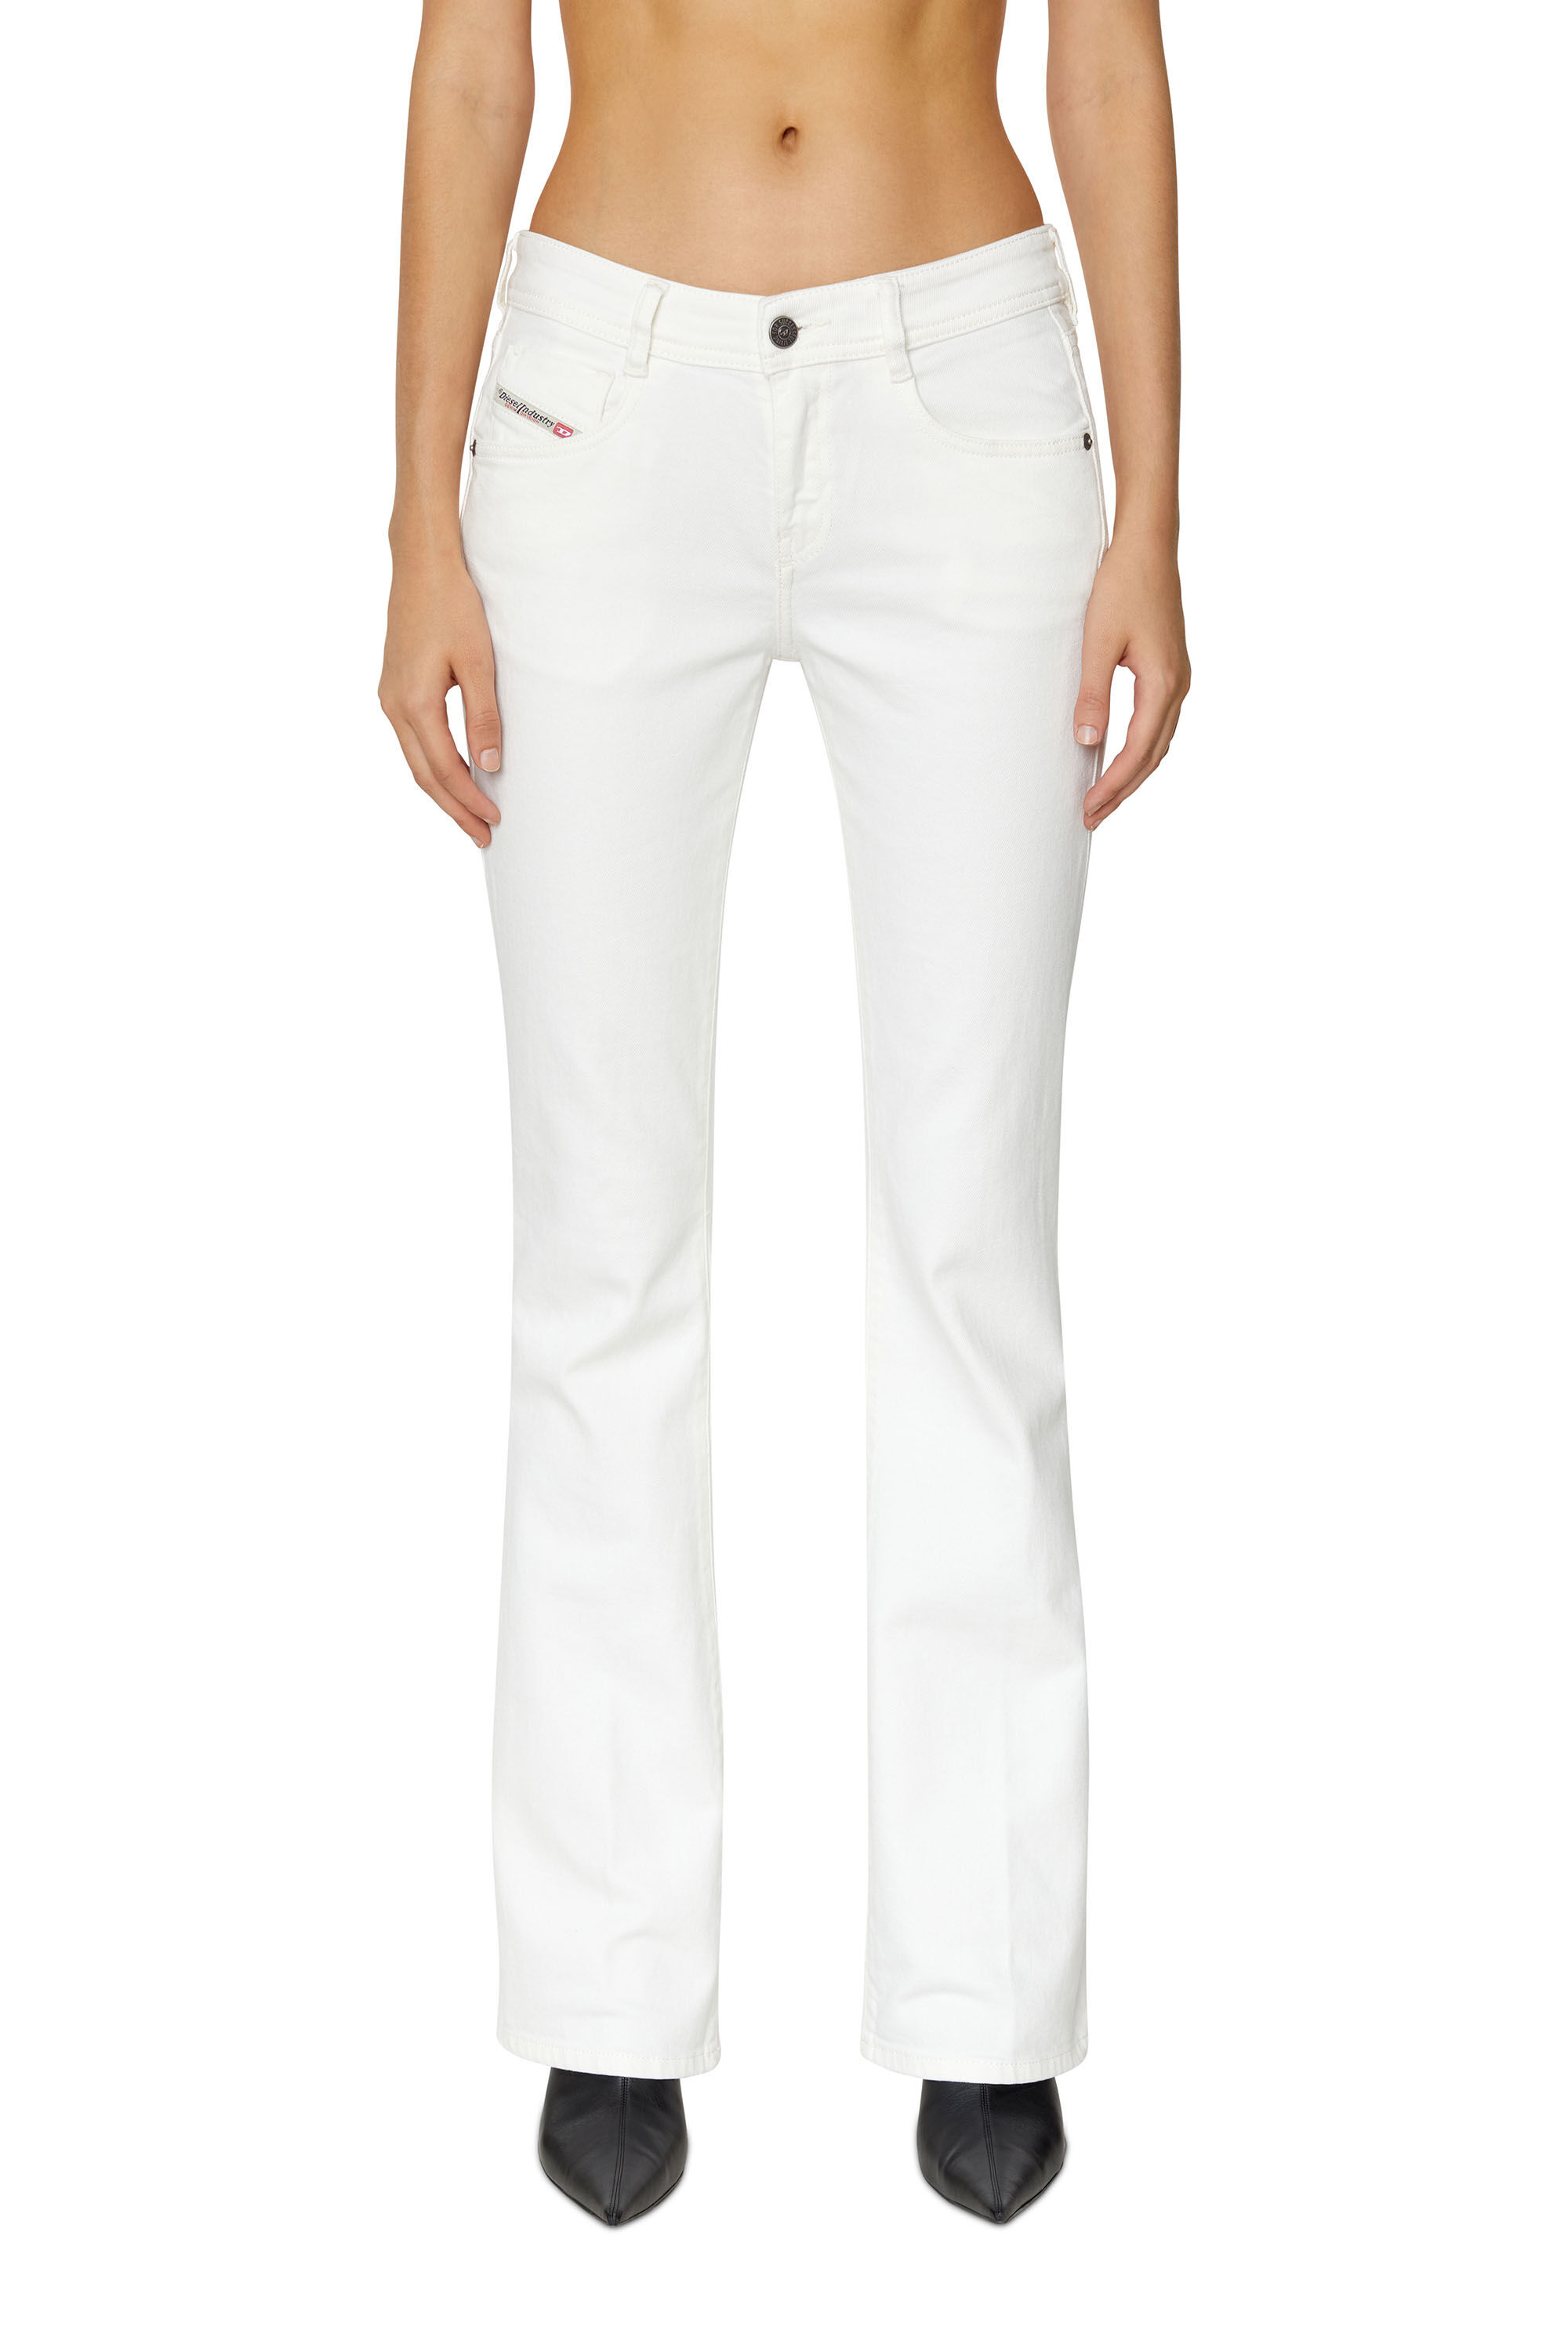 Diesel - Bootcut and Flare Jeans 1969 D-Ebbey 09D63, Mujer Bootcut y Flare Jeans - 1969 D-Ebbey in Blanco - Image 3